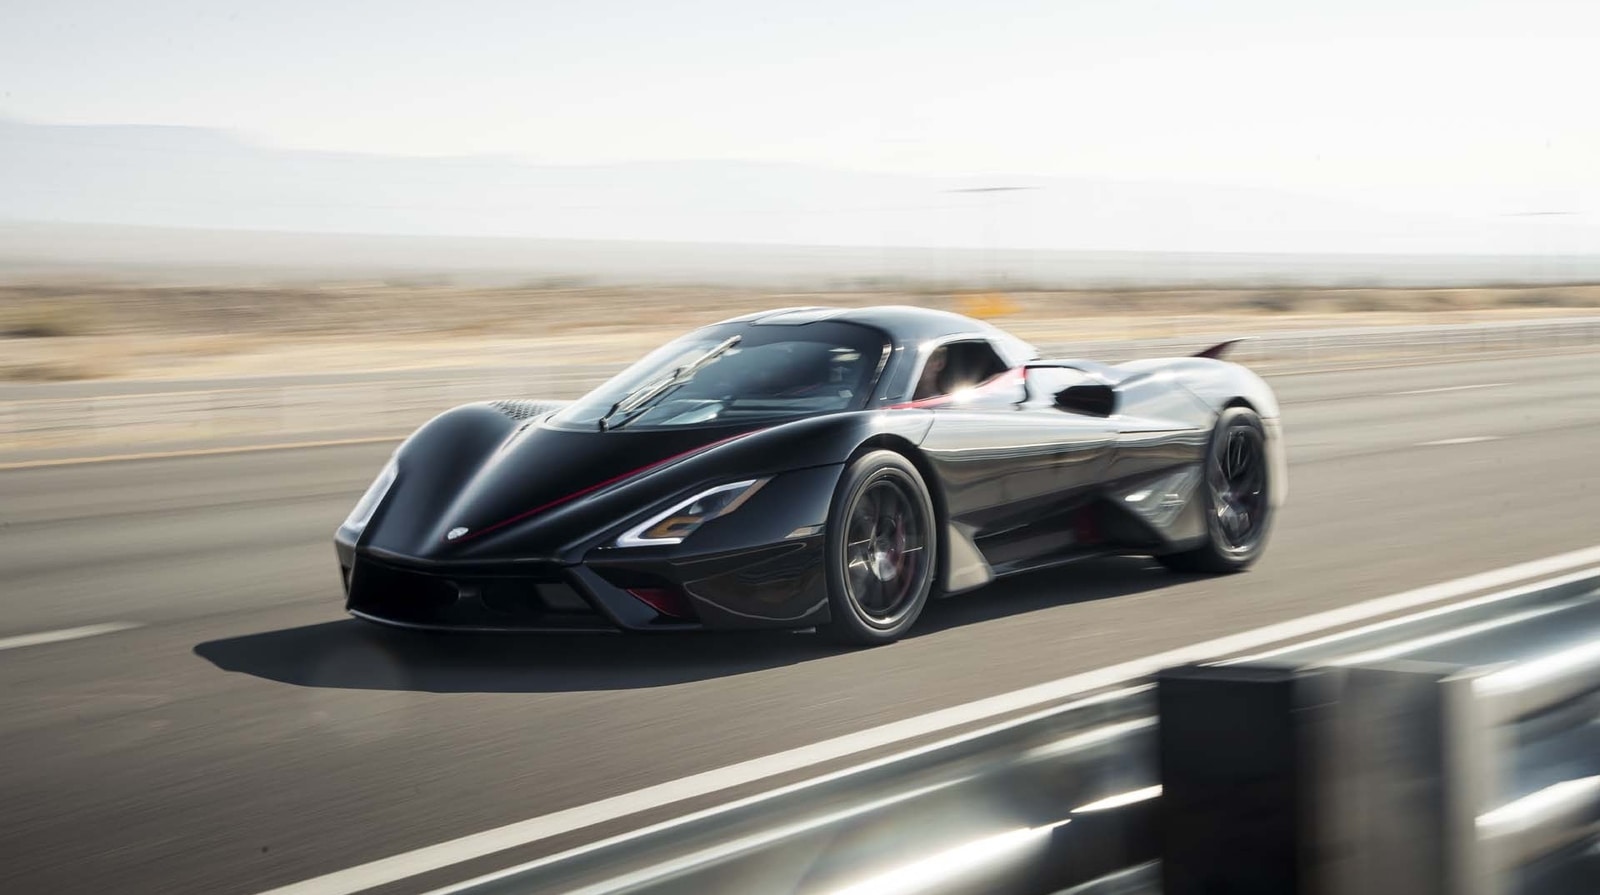 Here Is The New Fastest Production Car In The World 509 Km/h Top Speed